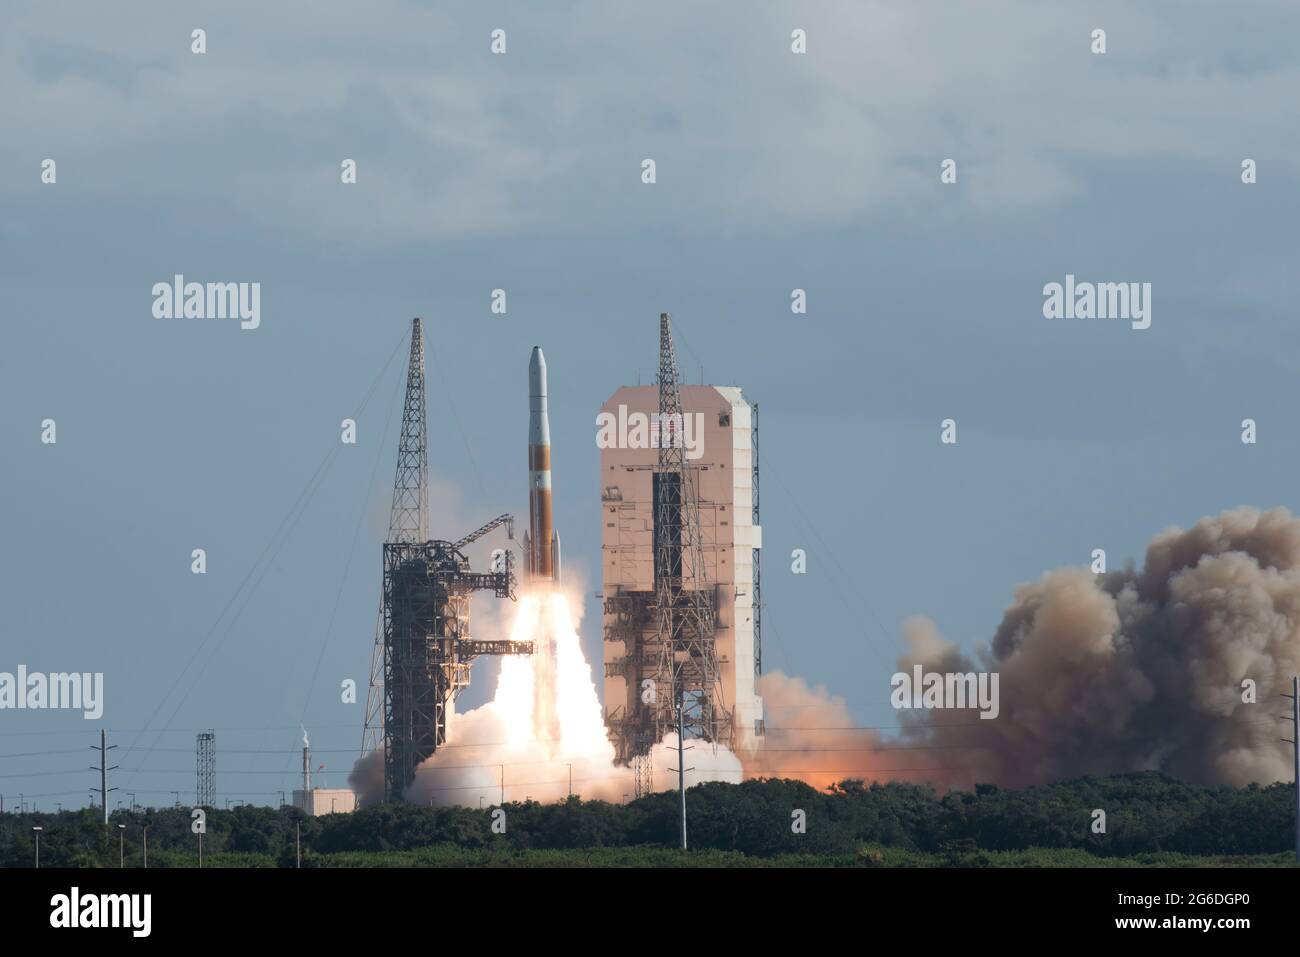 United Launch Alliance's Delta IV GPS III Magellan rocket launched from Cape Canaveral Air Force Station, Florida, Aug. 22, 2019. The GPS-III lifted off from Space Launch Complex-37 and represents the next step in modernizing the navigation network worldwide with a new generation of satellites to offer improved accuracy, better resiliency and a new signal for civil users. (U.S. Air Force photo by Airman 1st Class Dalton Williams) Stock Photo